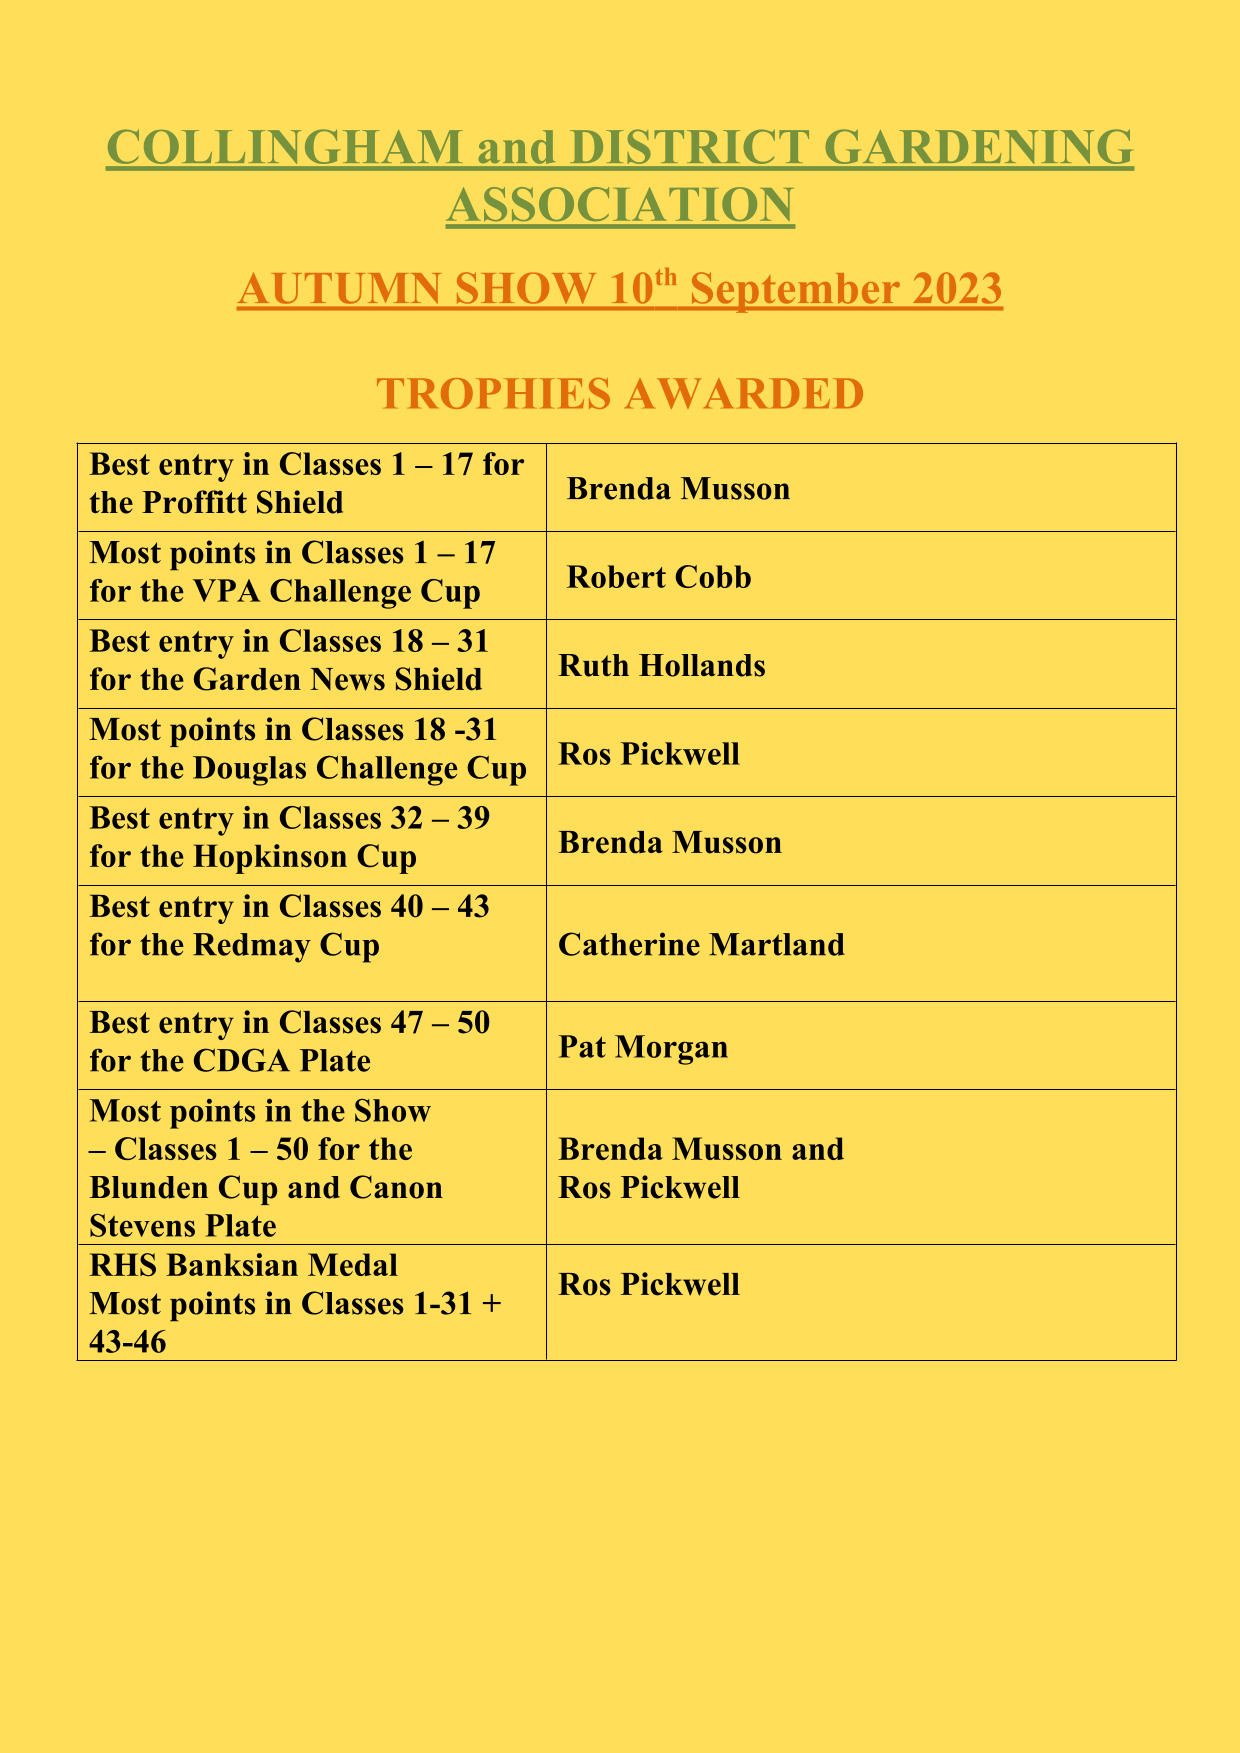 Collingham and District Gardening Association Autumn Show - Results